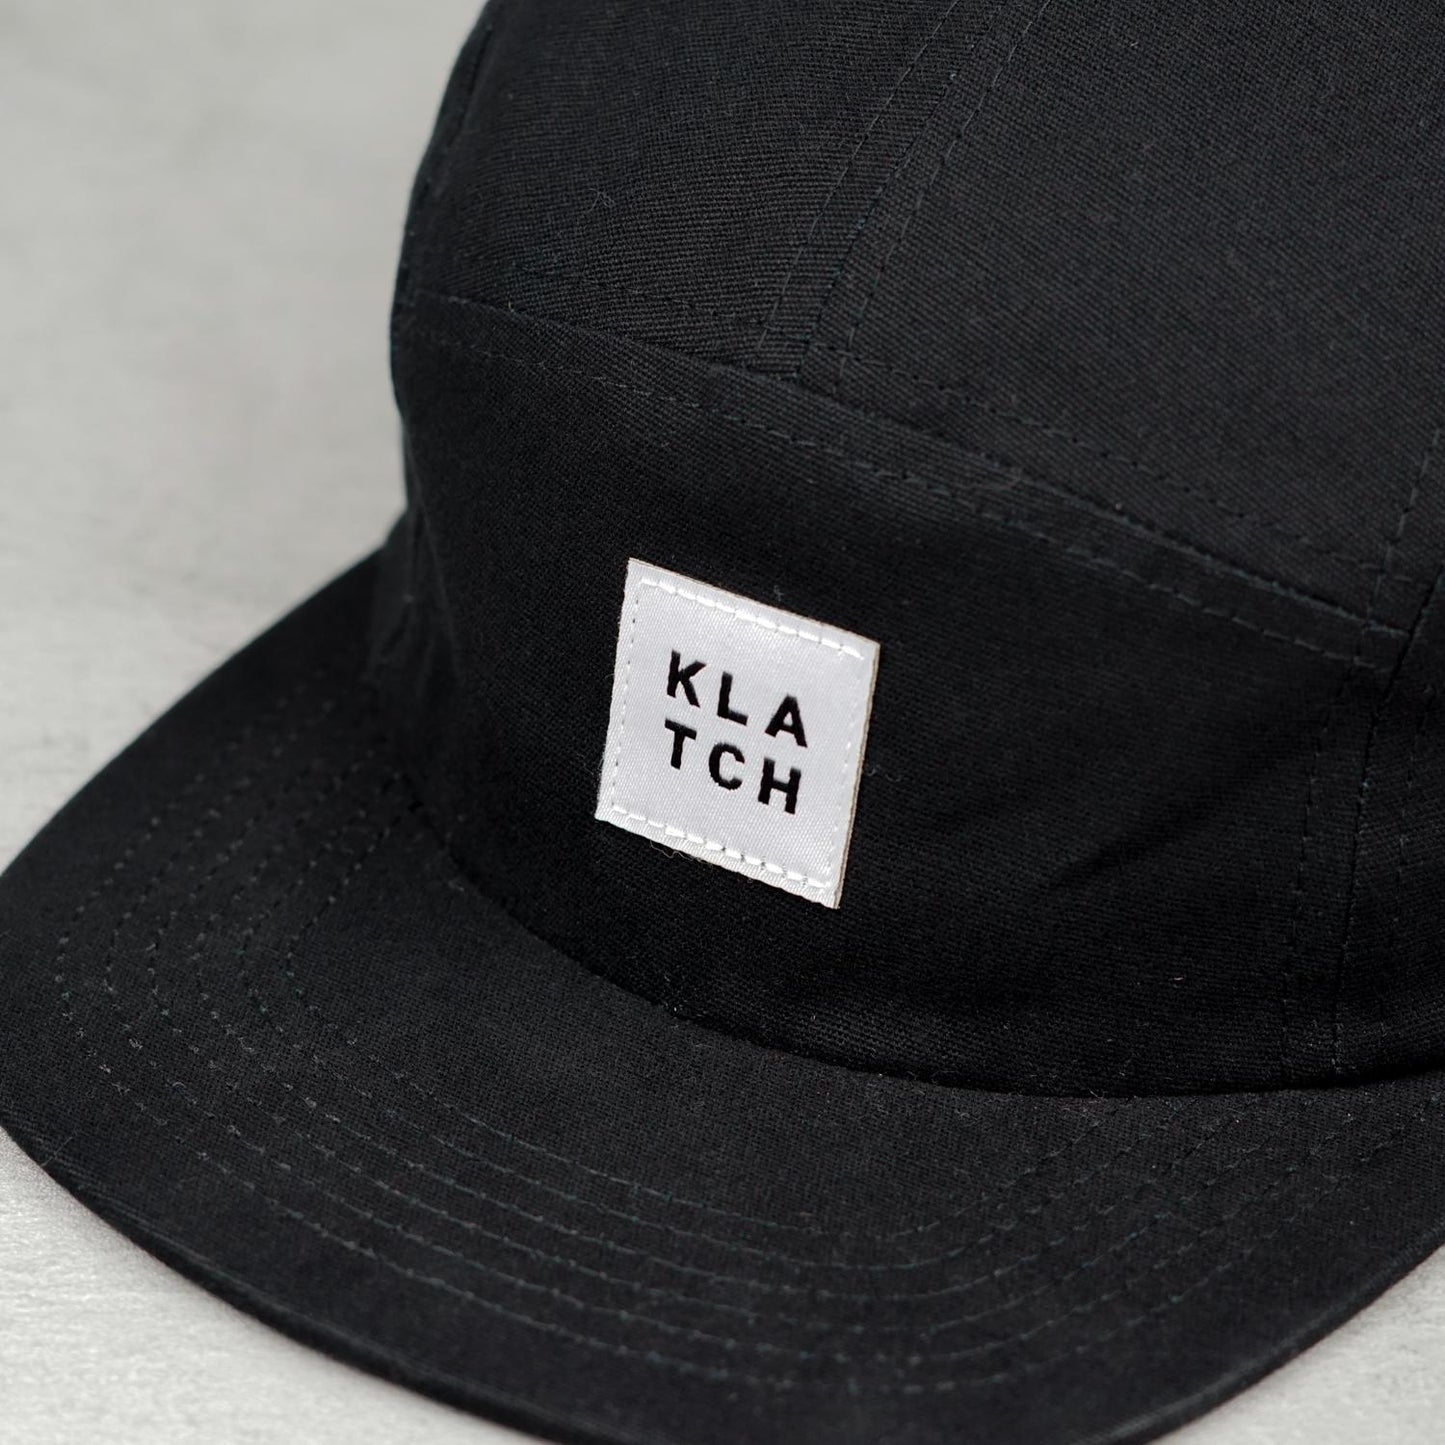 white woven label on five panel hat